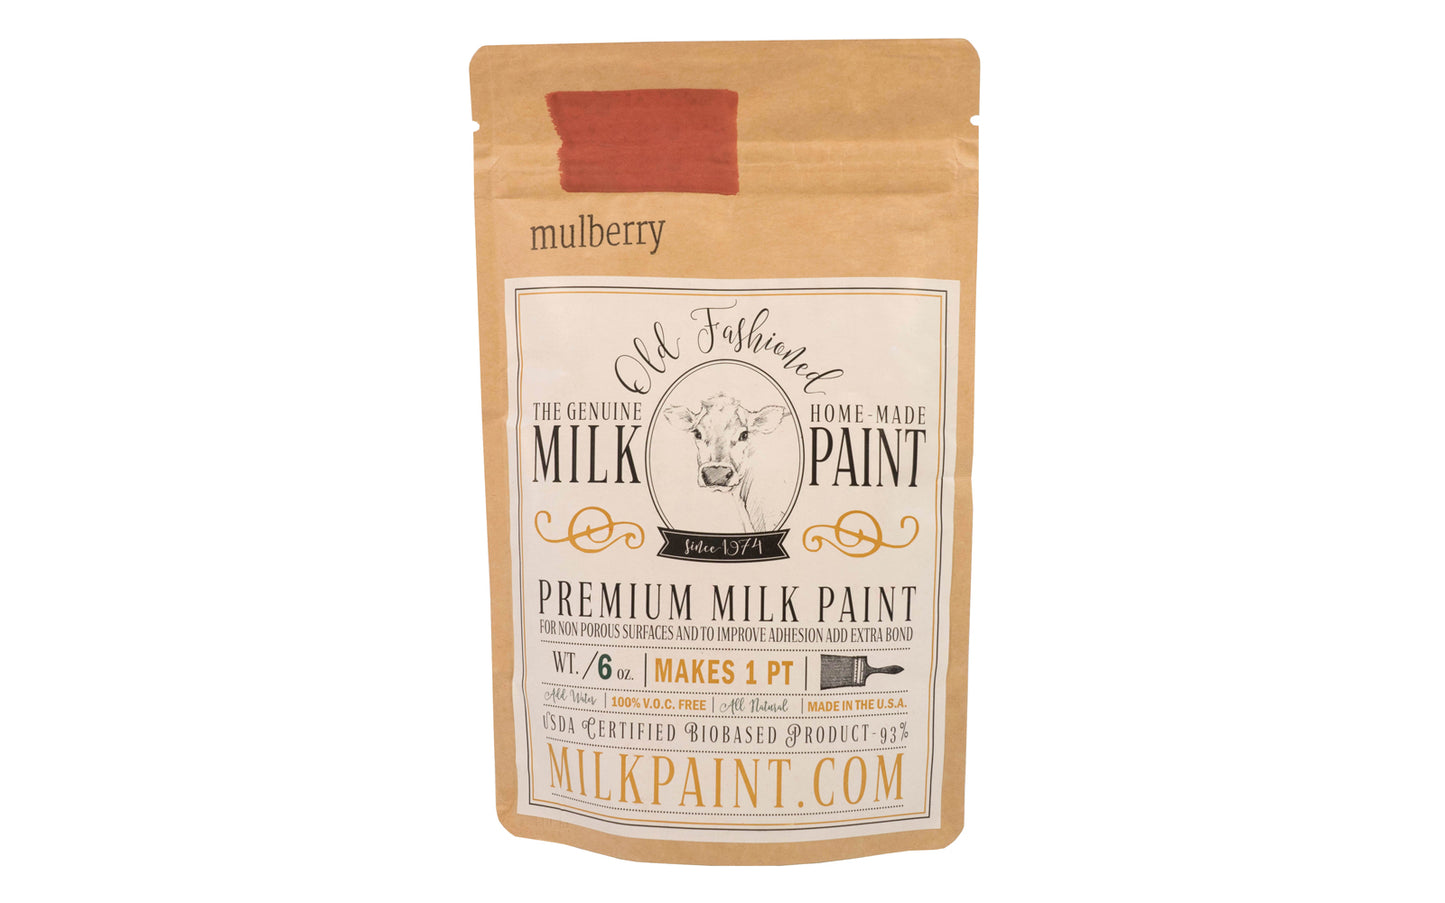 This Milk Paint color is "Mulberry" color - It is a red with rose and brown undertones. Comes in a powder form, you can control how thick/thin you mix the paint. Use it as you would regular paint, thinner for a wash/stain or thicker to create texture. Environmentally safe, non-toxic & is food safe. 100% VOC free. Powder Paint